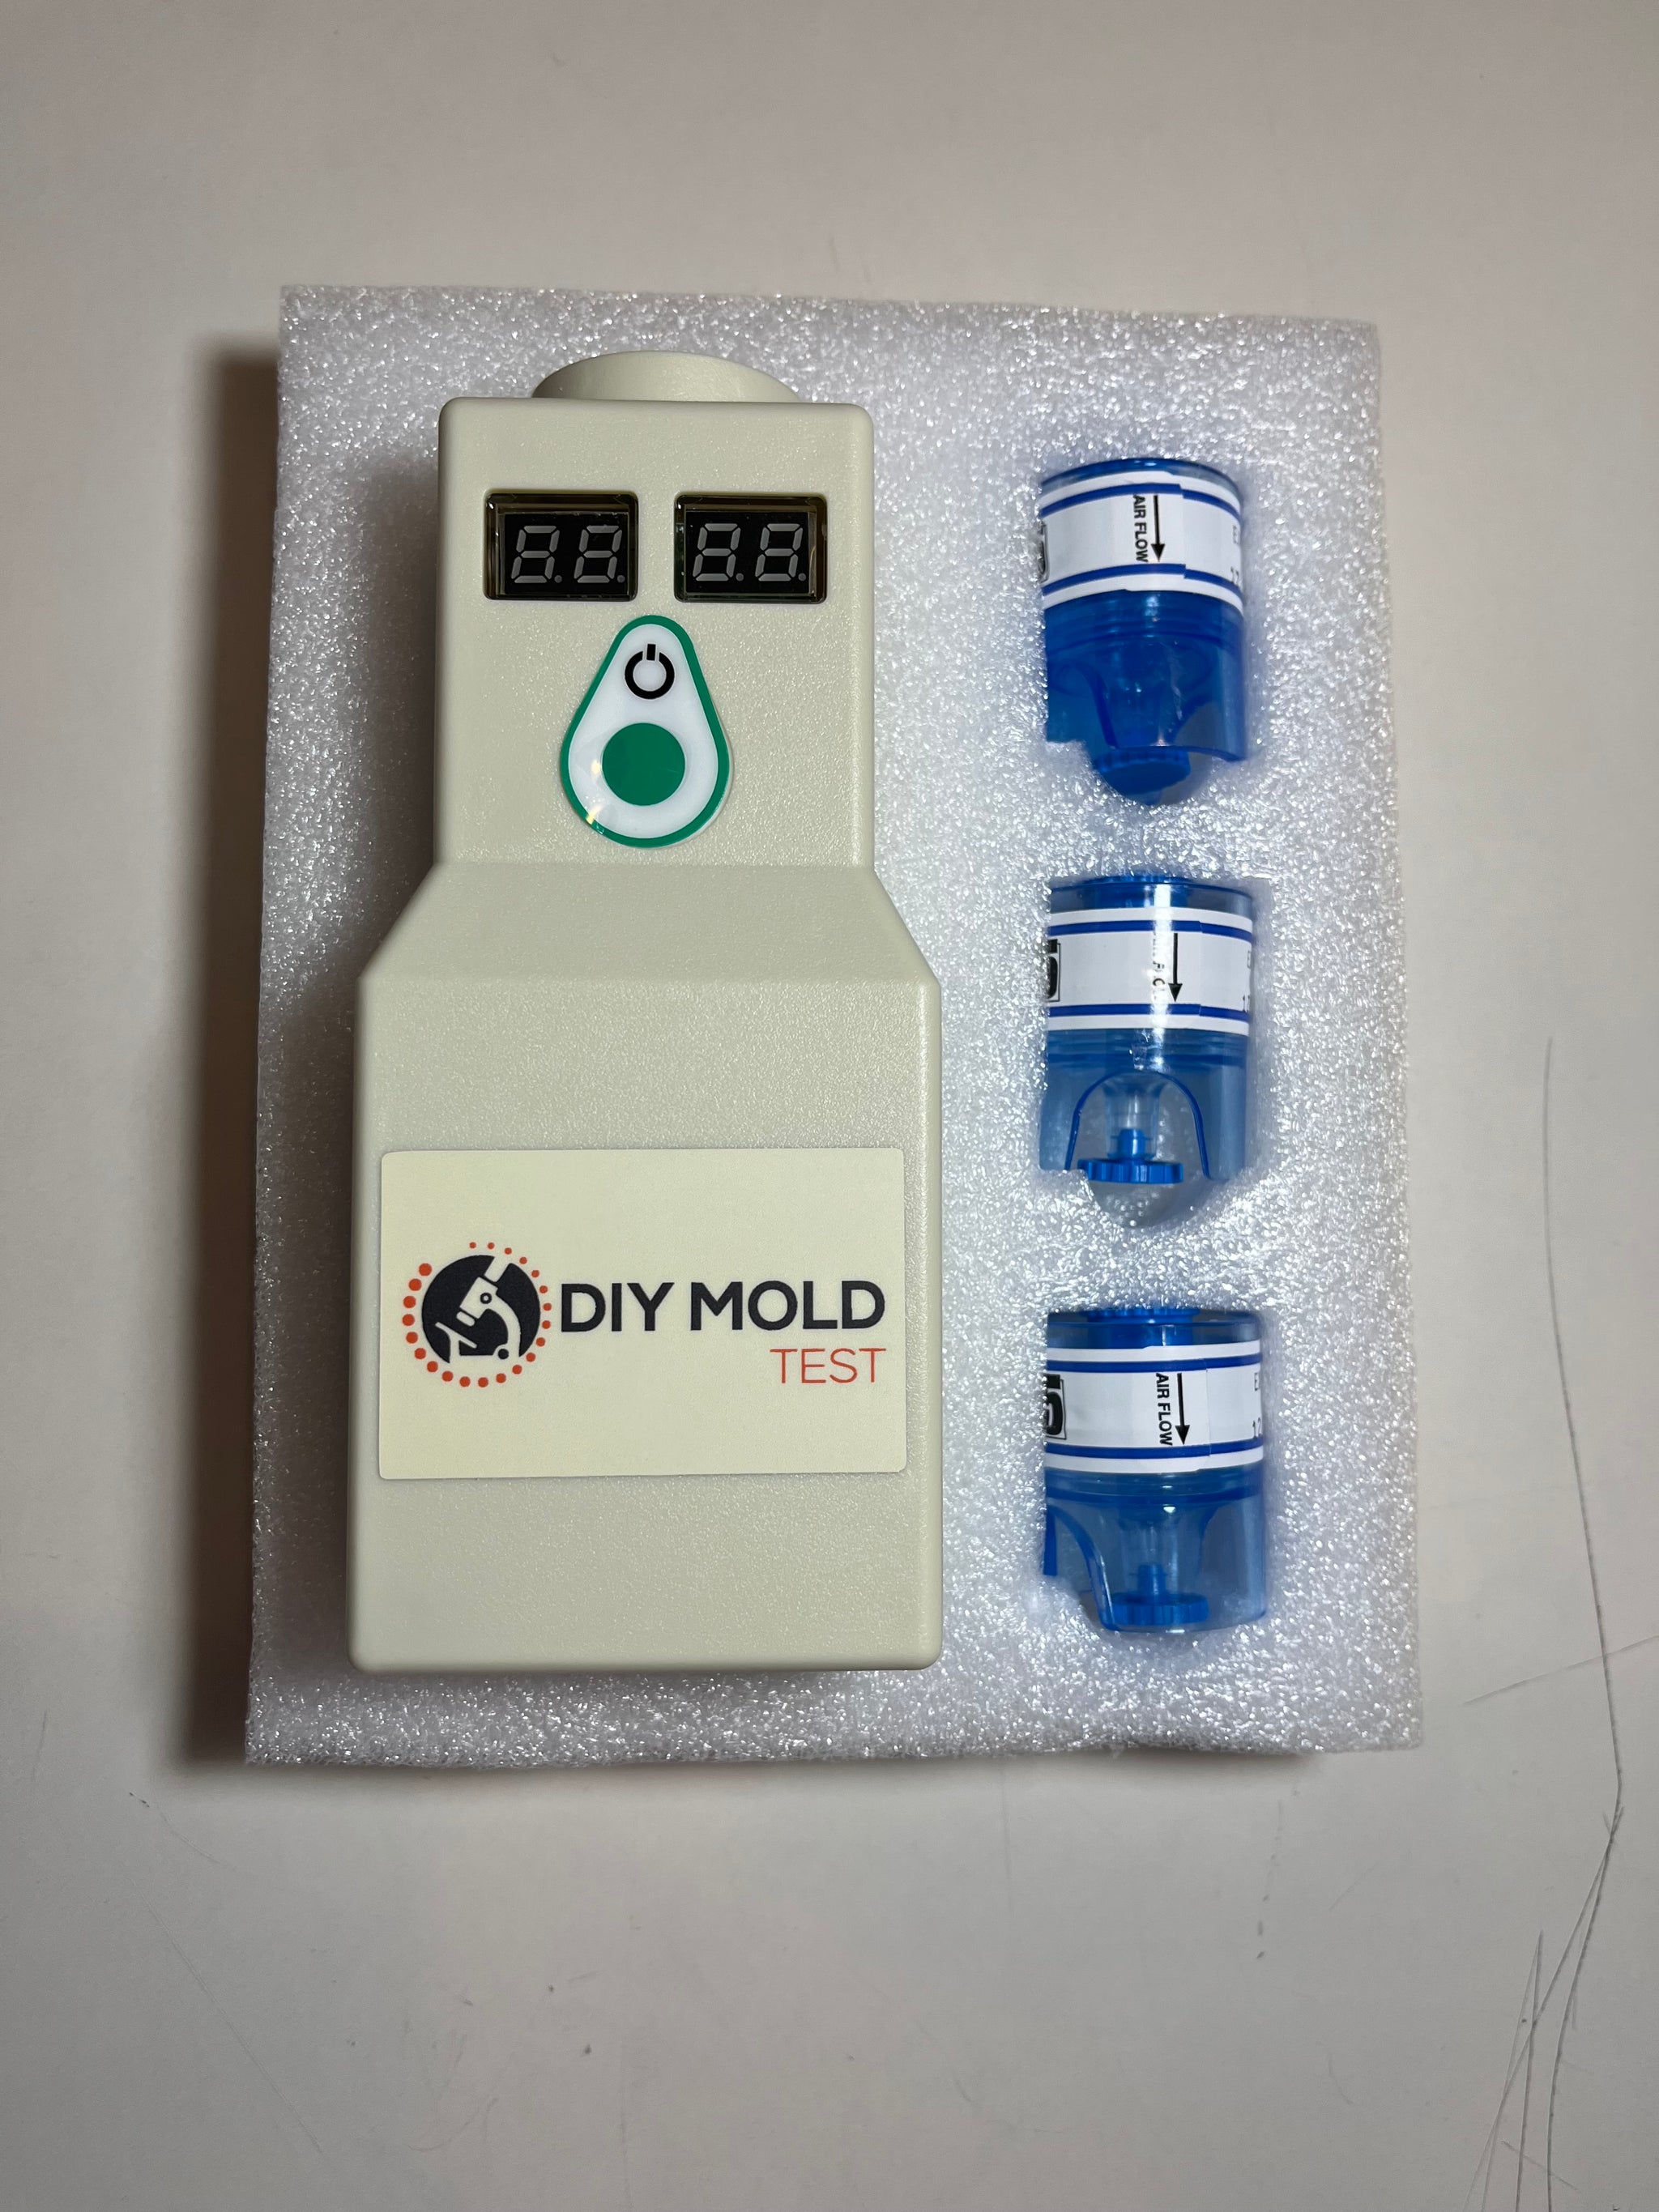 Supreme - DIY Mold Test Kit for Home Air Quality - Air and Surface Mold Testing - Pre-Paid Return Mailer and Expert Mold Consultation - Includes